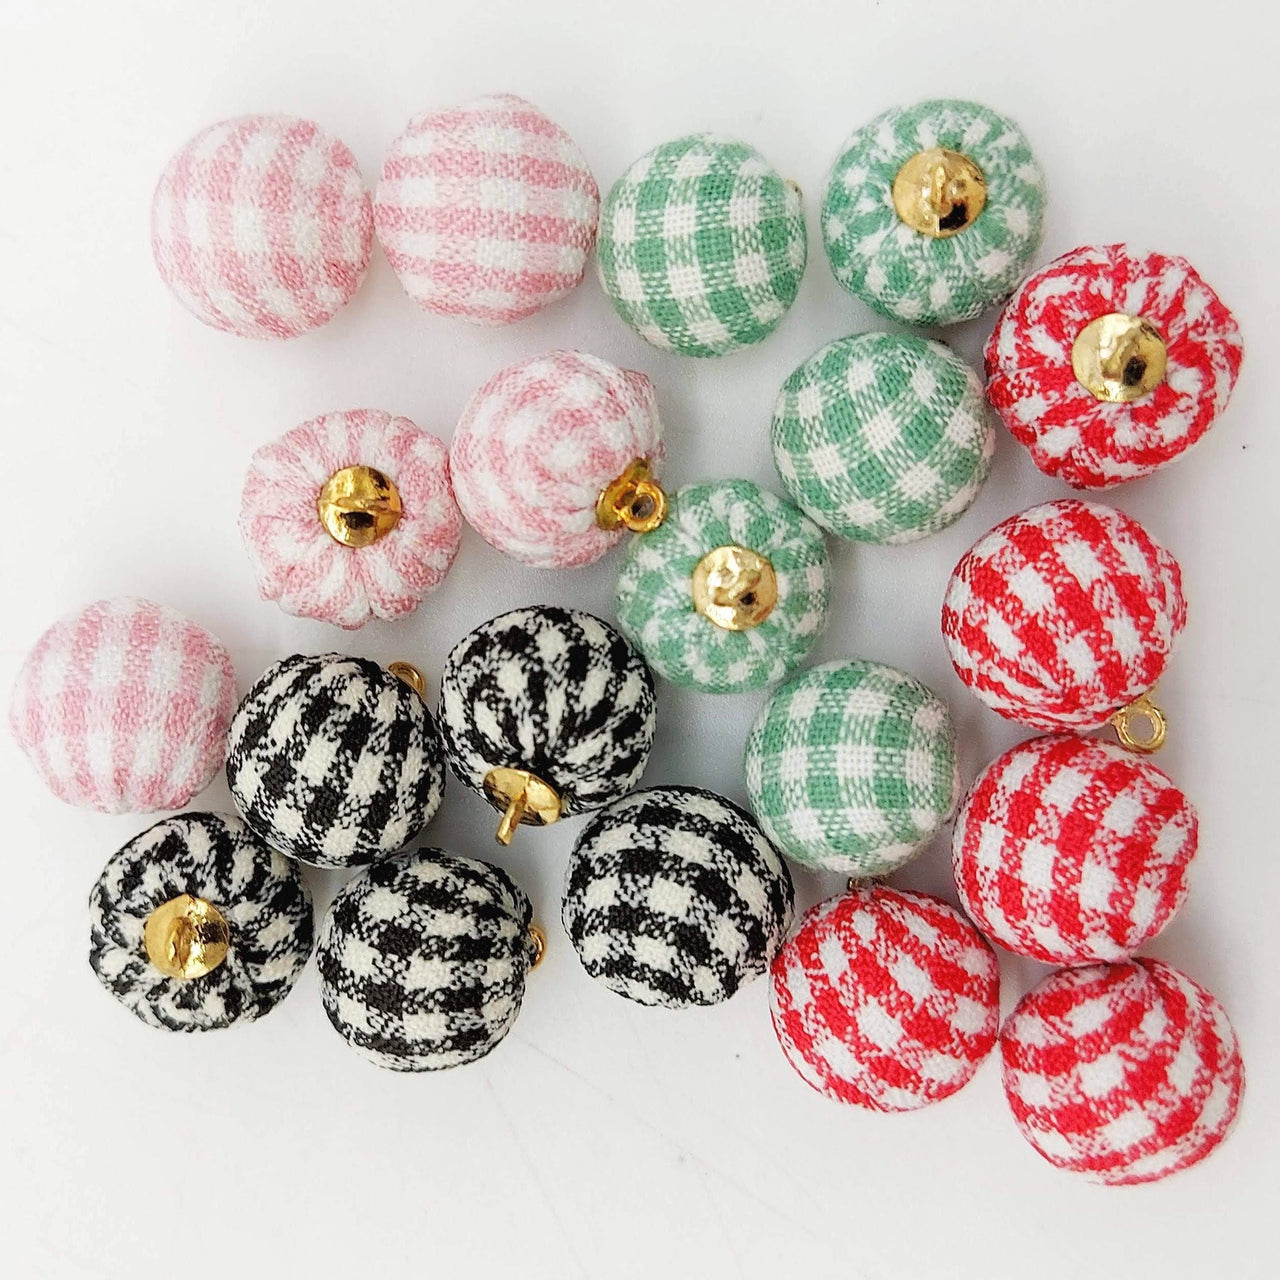 Green and White Checkered Cotton Small Fabric Balls Tassel, Button with Ring Cap, Decorative Tassels